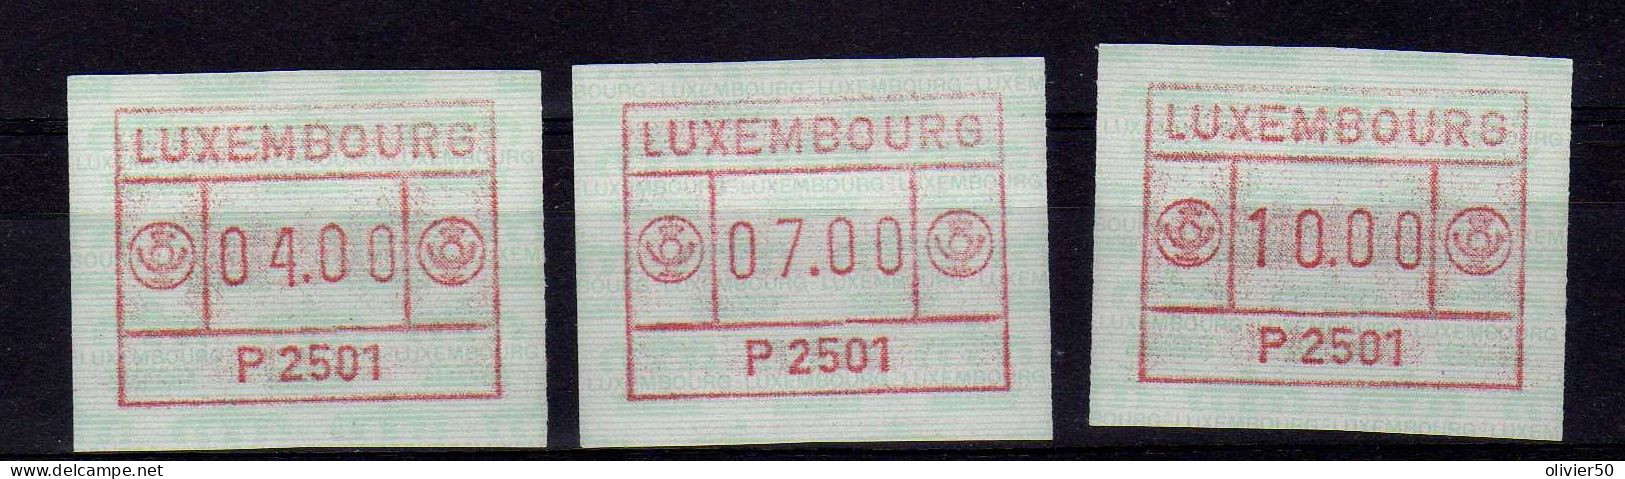 Luxembourg (1983) -  3 Timbres De Distributeur -  Neufs** - MNH - Postage Labels